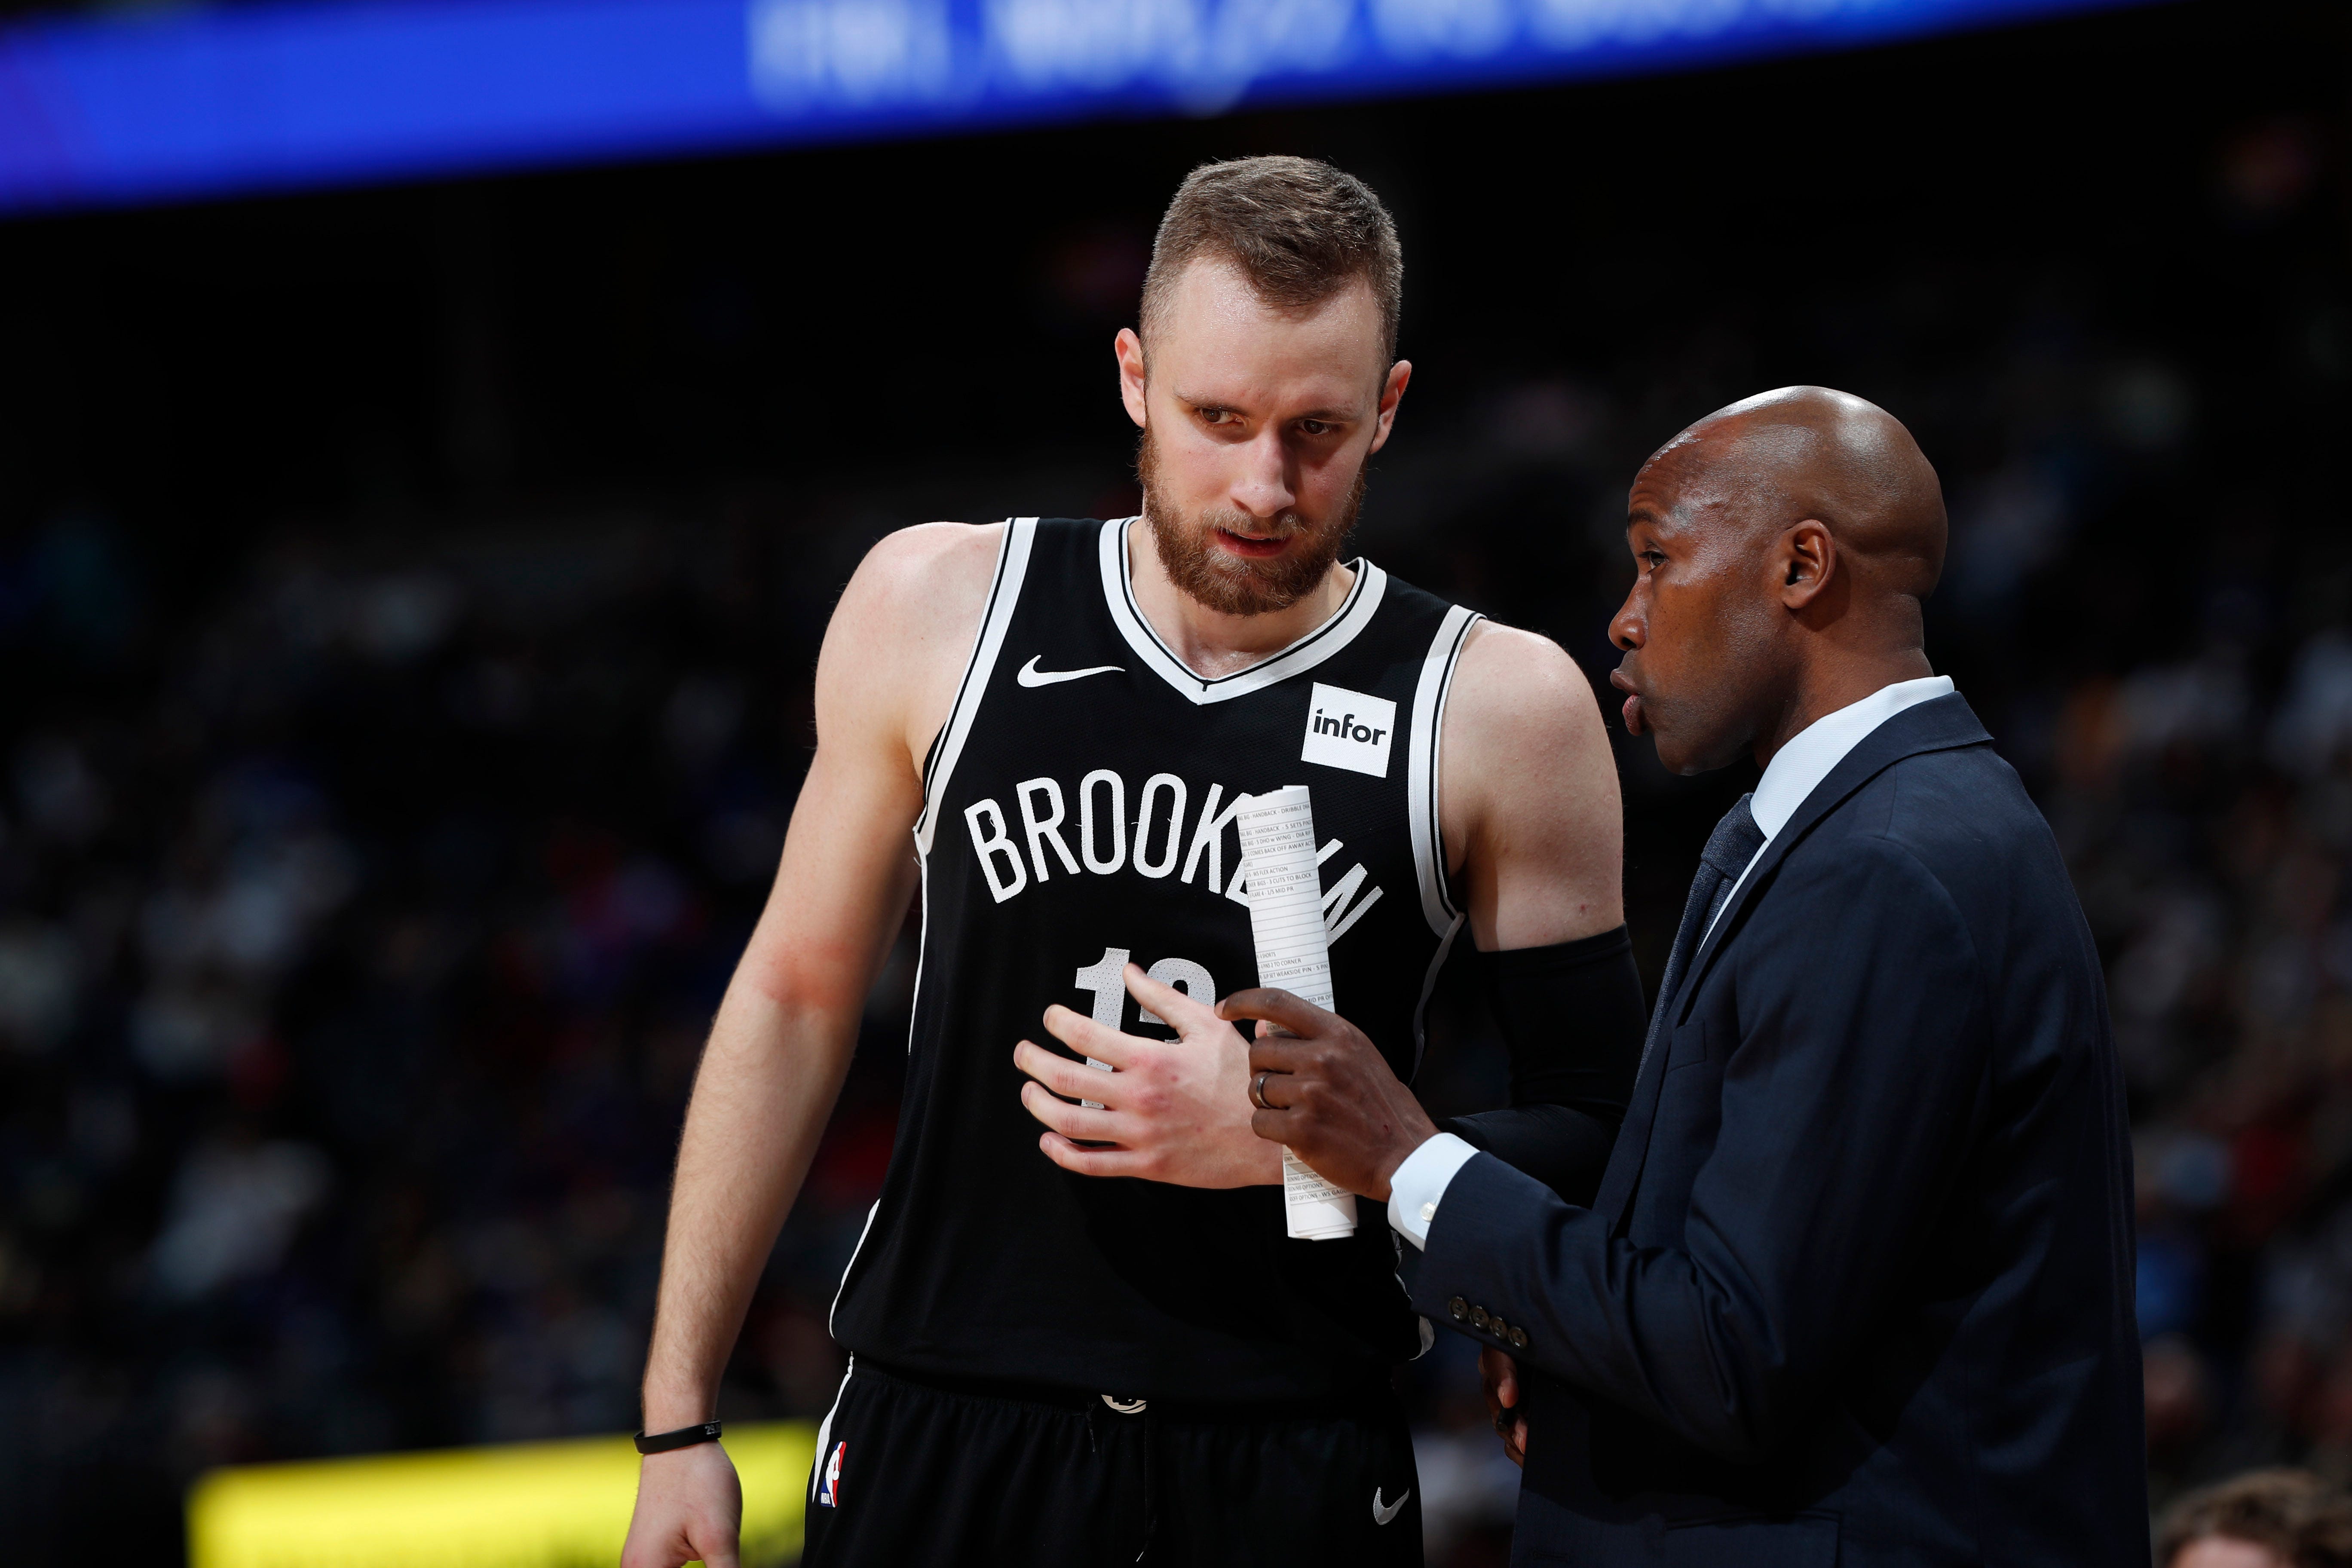 Brooklyn Nets guard Dzanan Musa (13) chats with assistant coach Jacque Vaughn in the second half of an NBA basketball game Thursday, Nov. 14, 2019 in Denver. The Nuggets won 101-93.